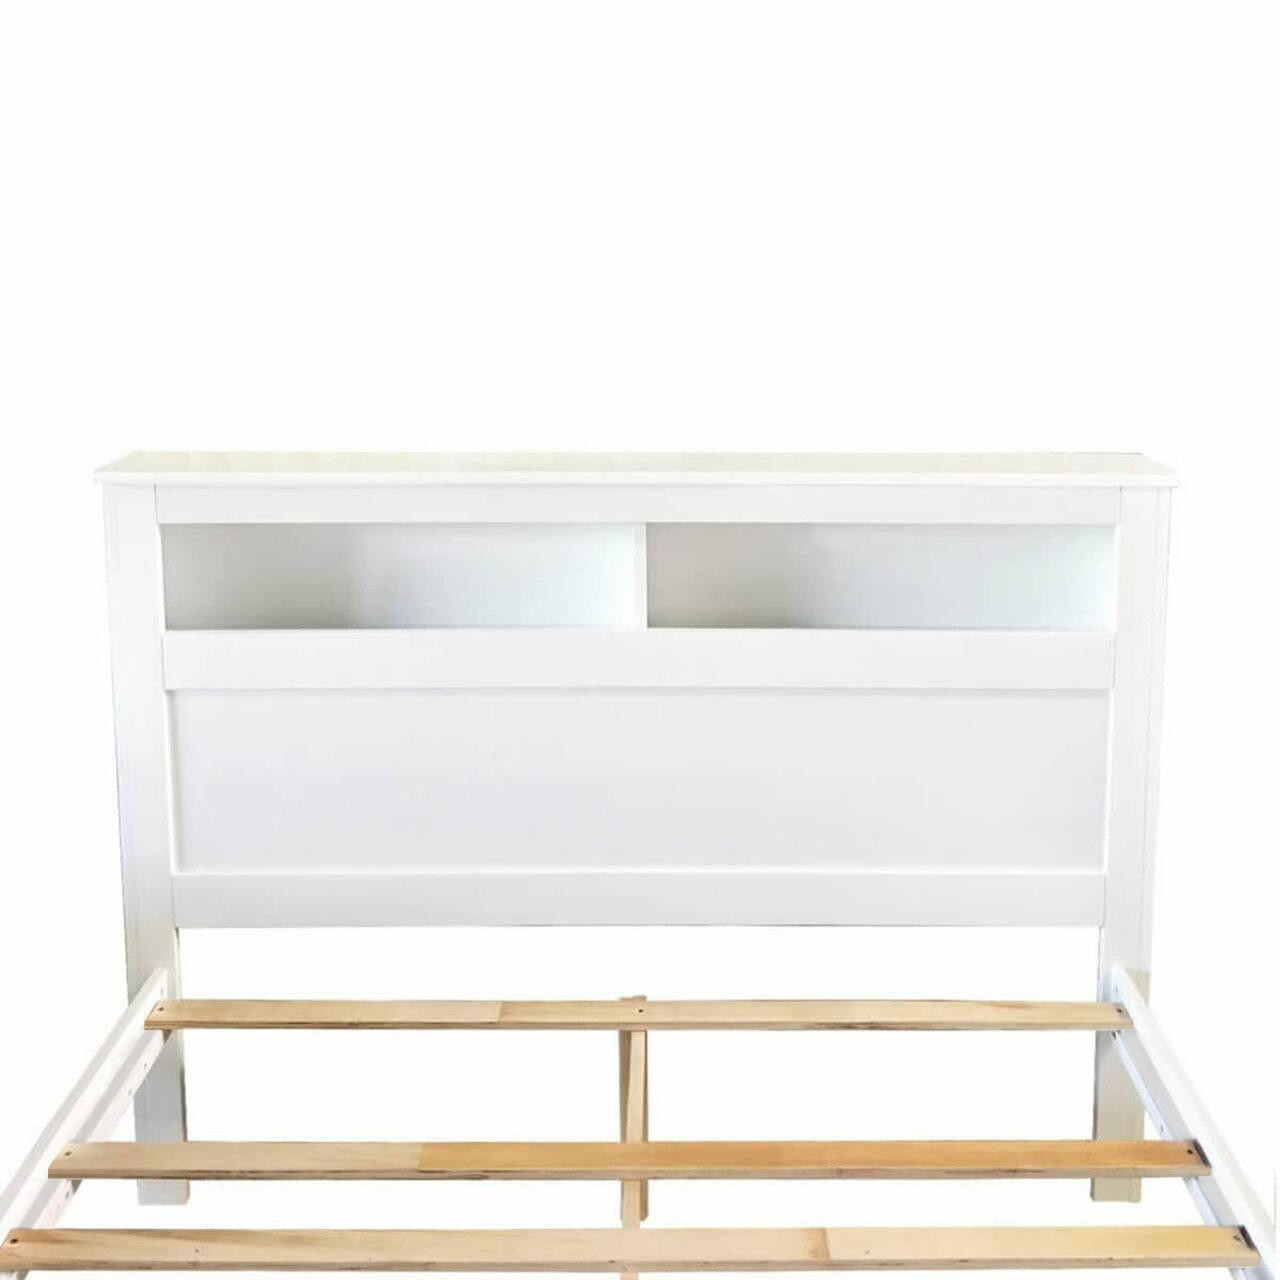 Porcia Timber Bed with Storage Shelves & Drawers - White